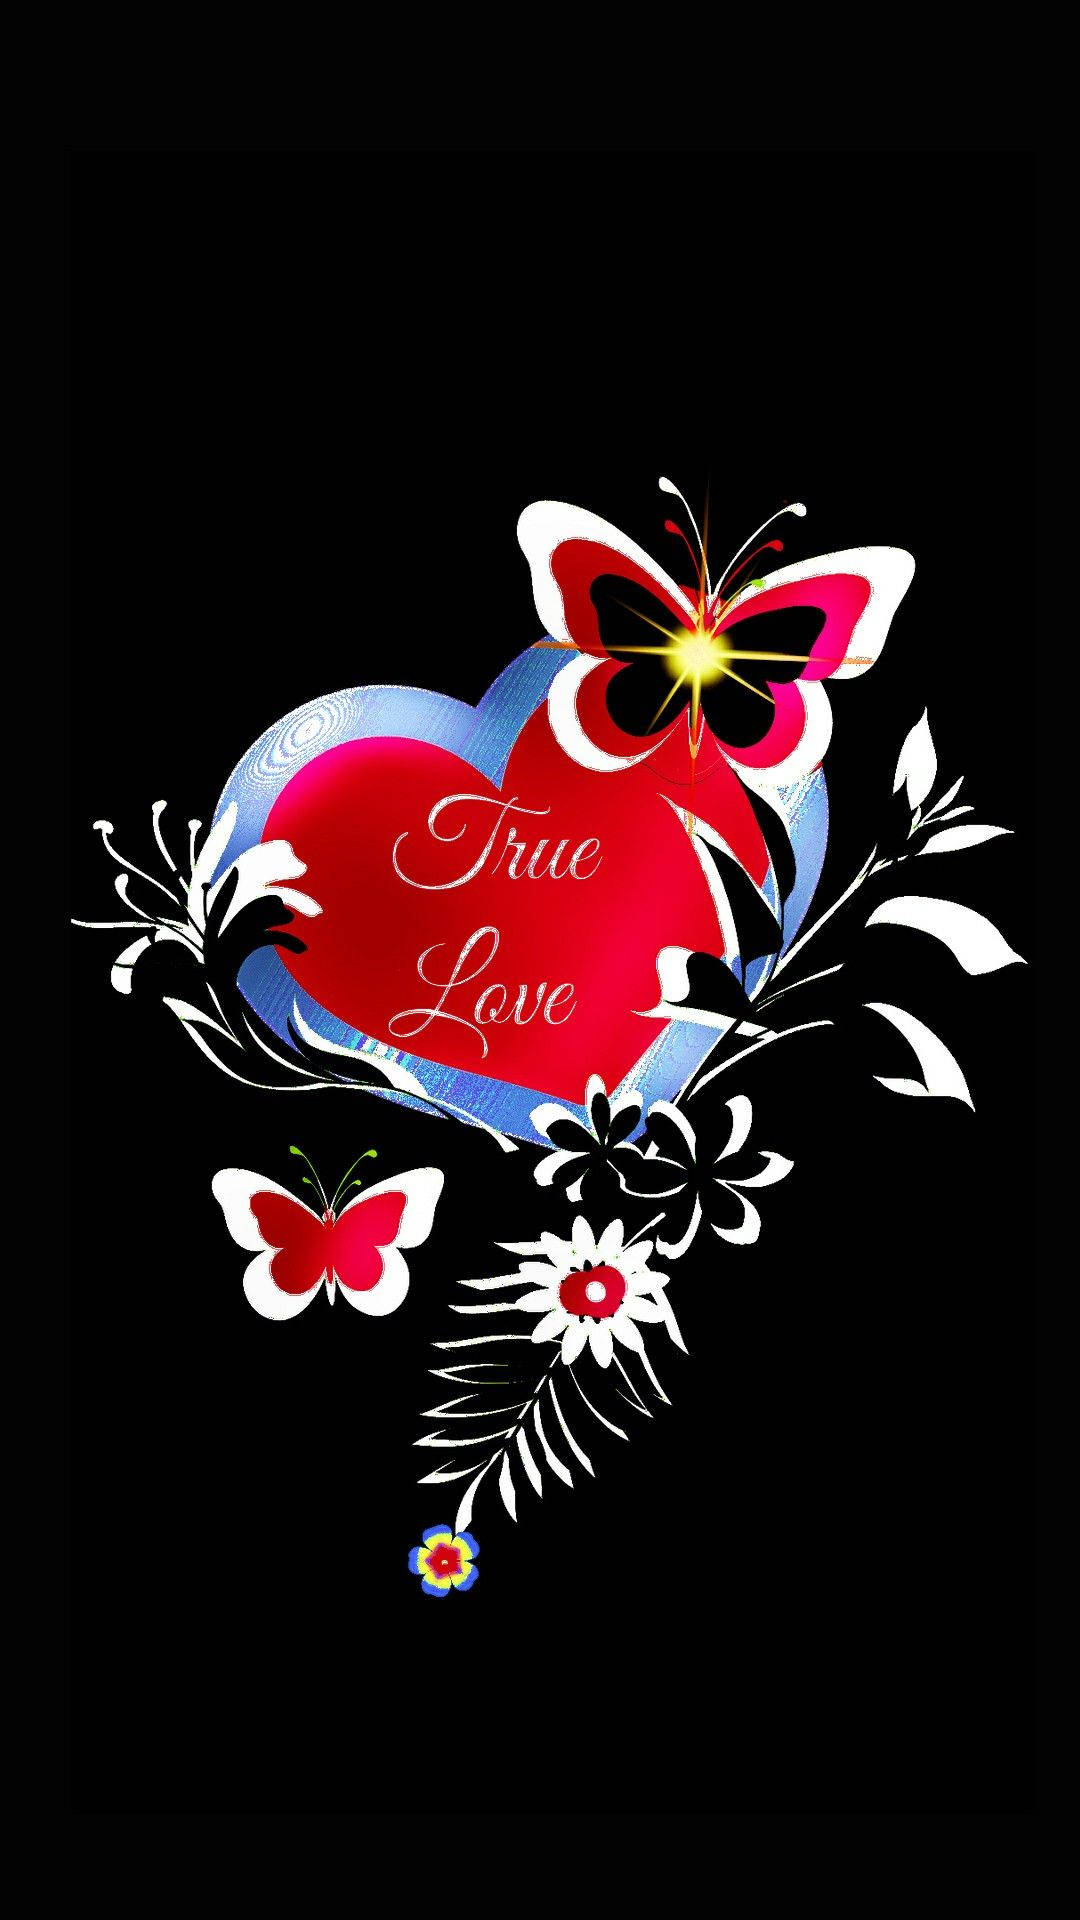 Download True Love Butterfly And Heart Wallpaper 